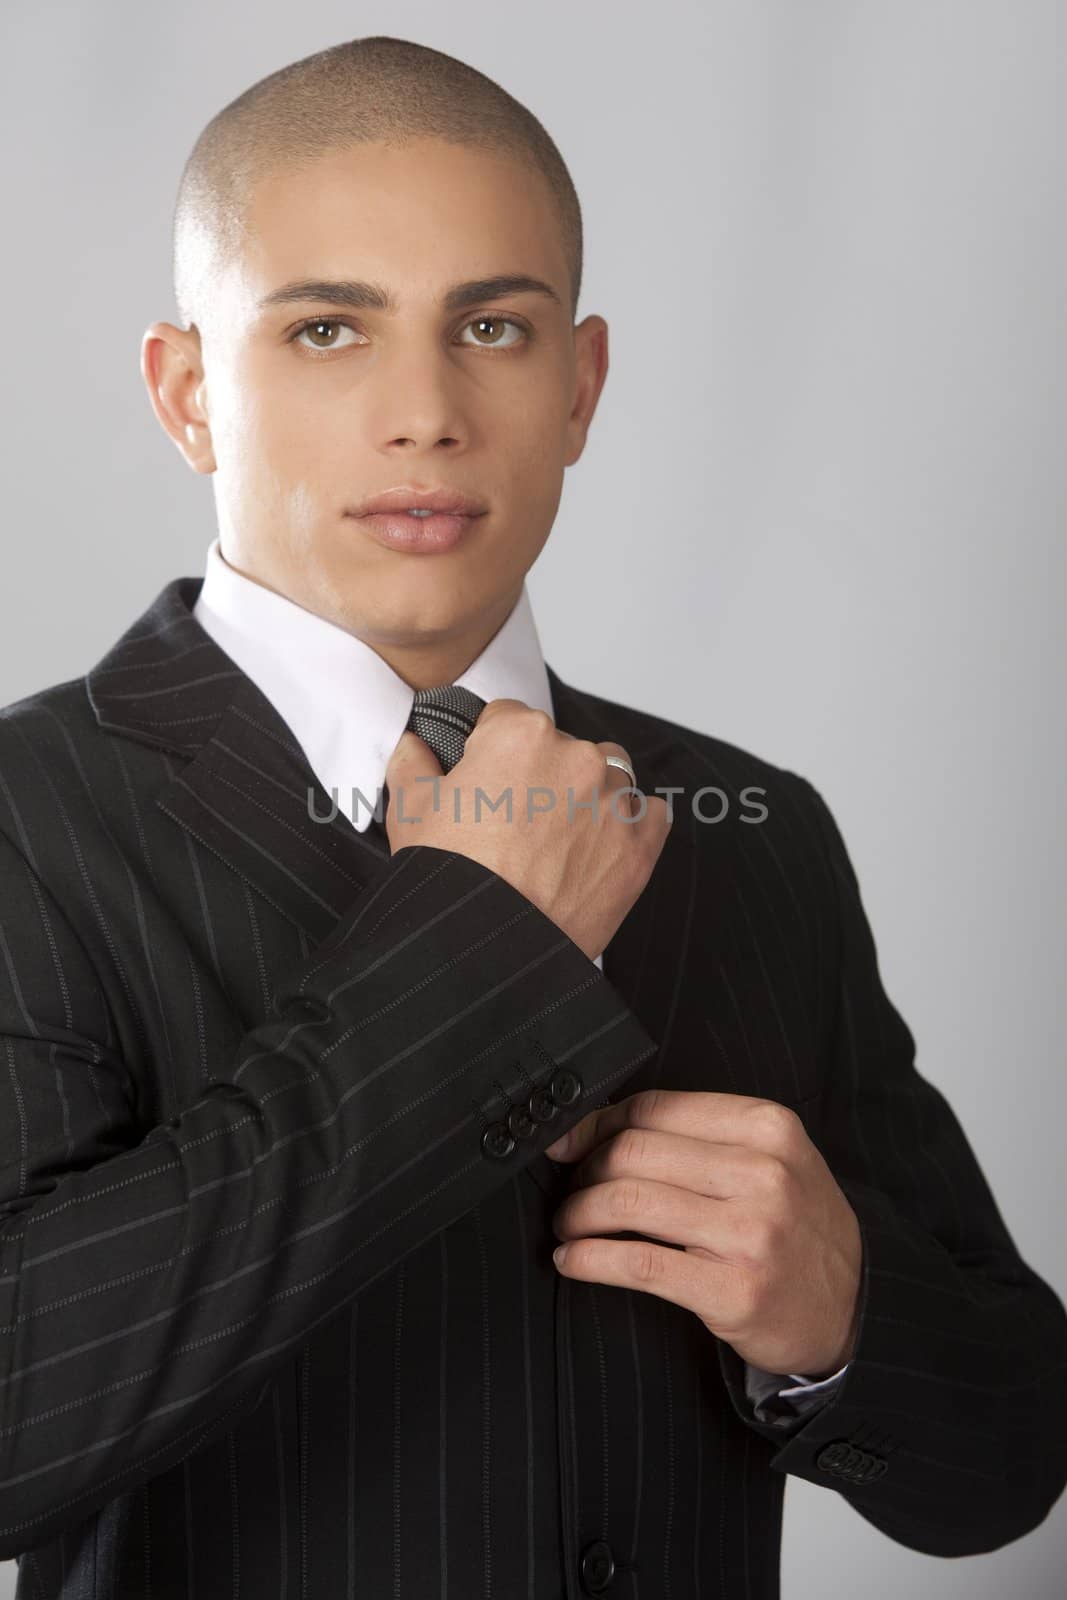 A young good looking businessman on a gray background.